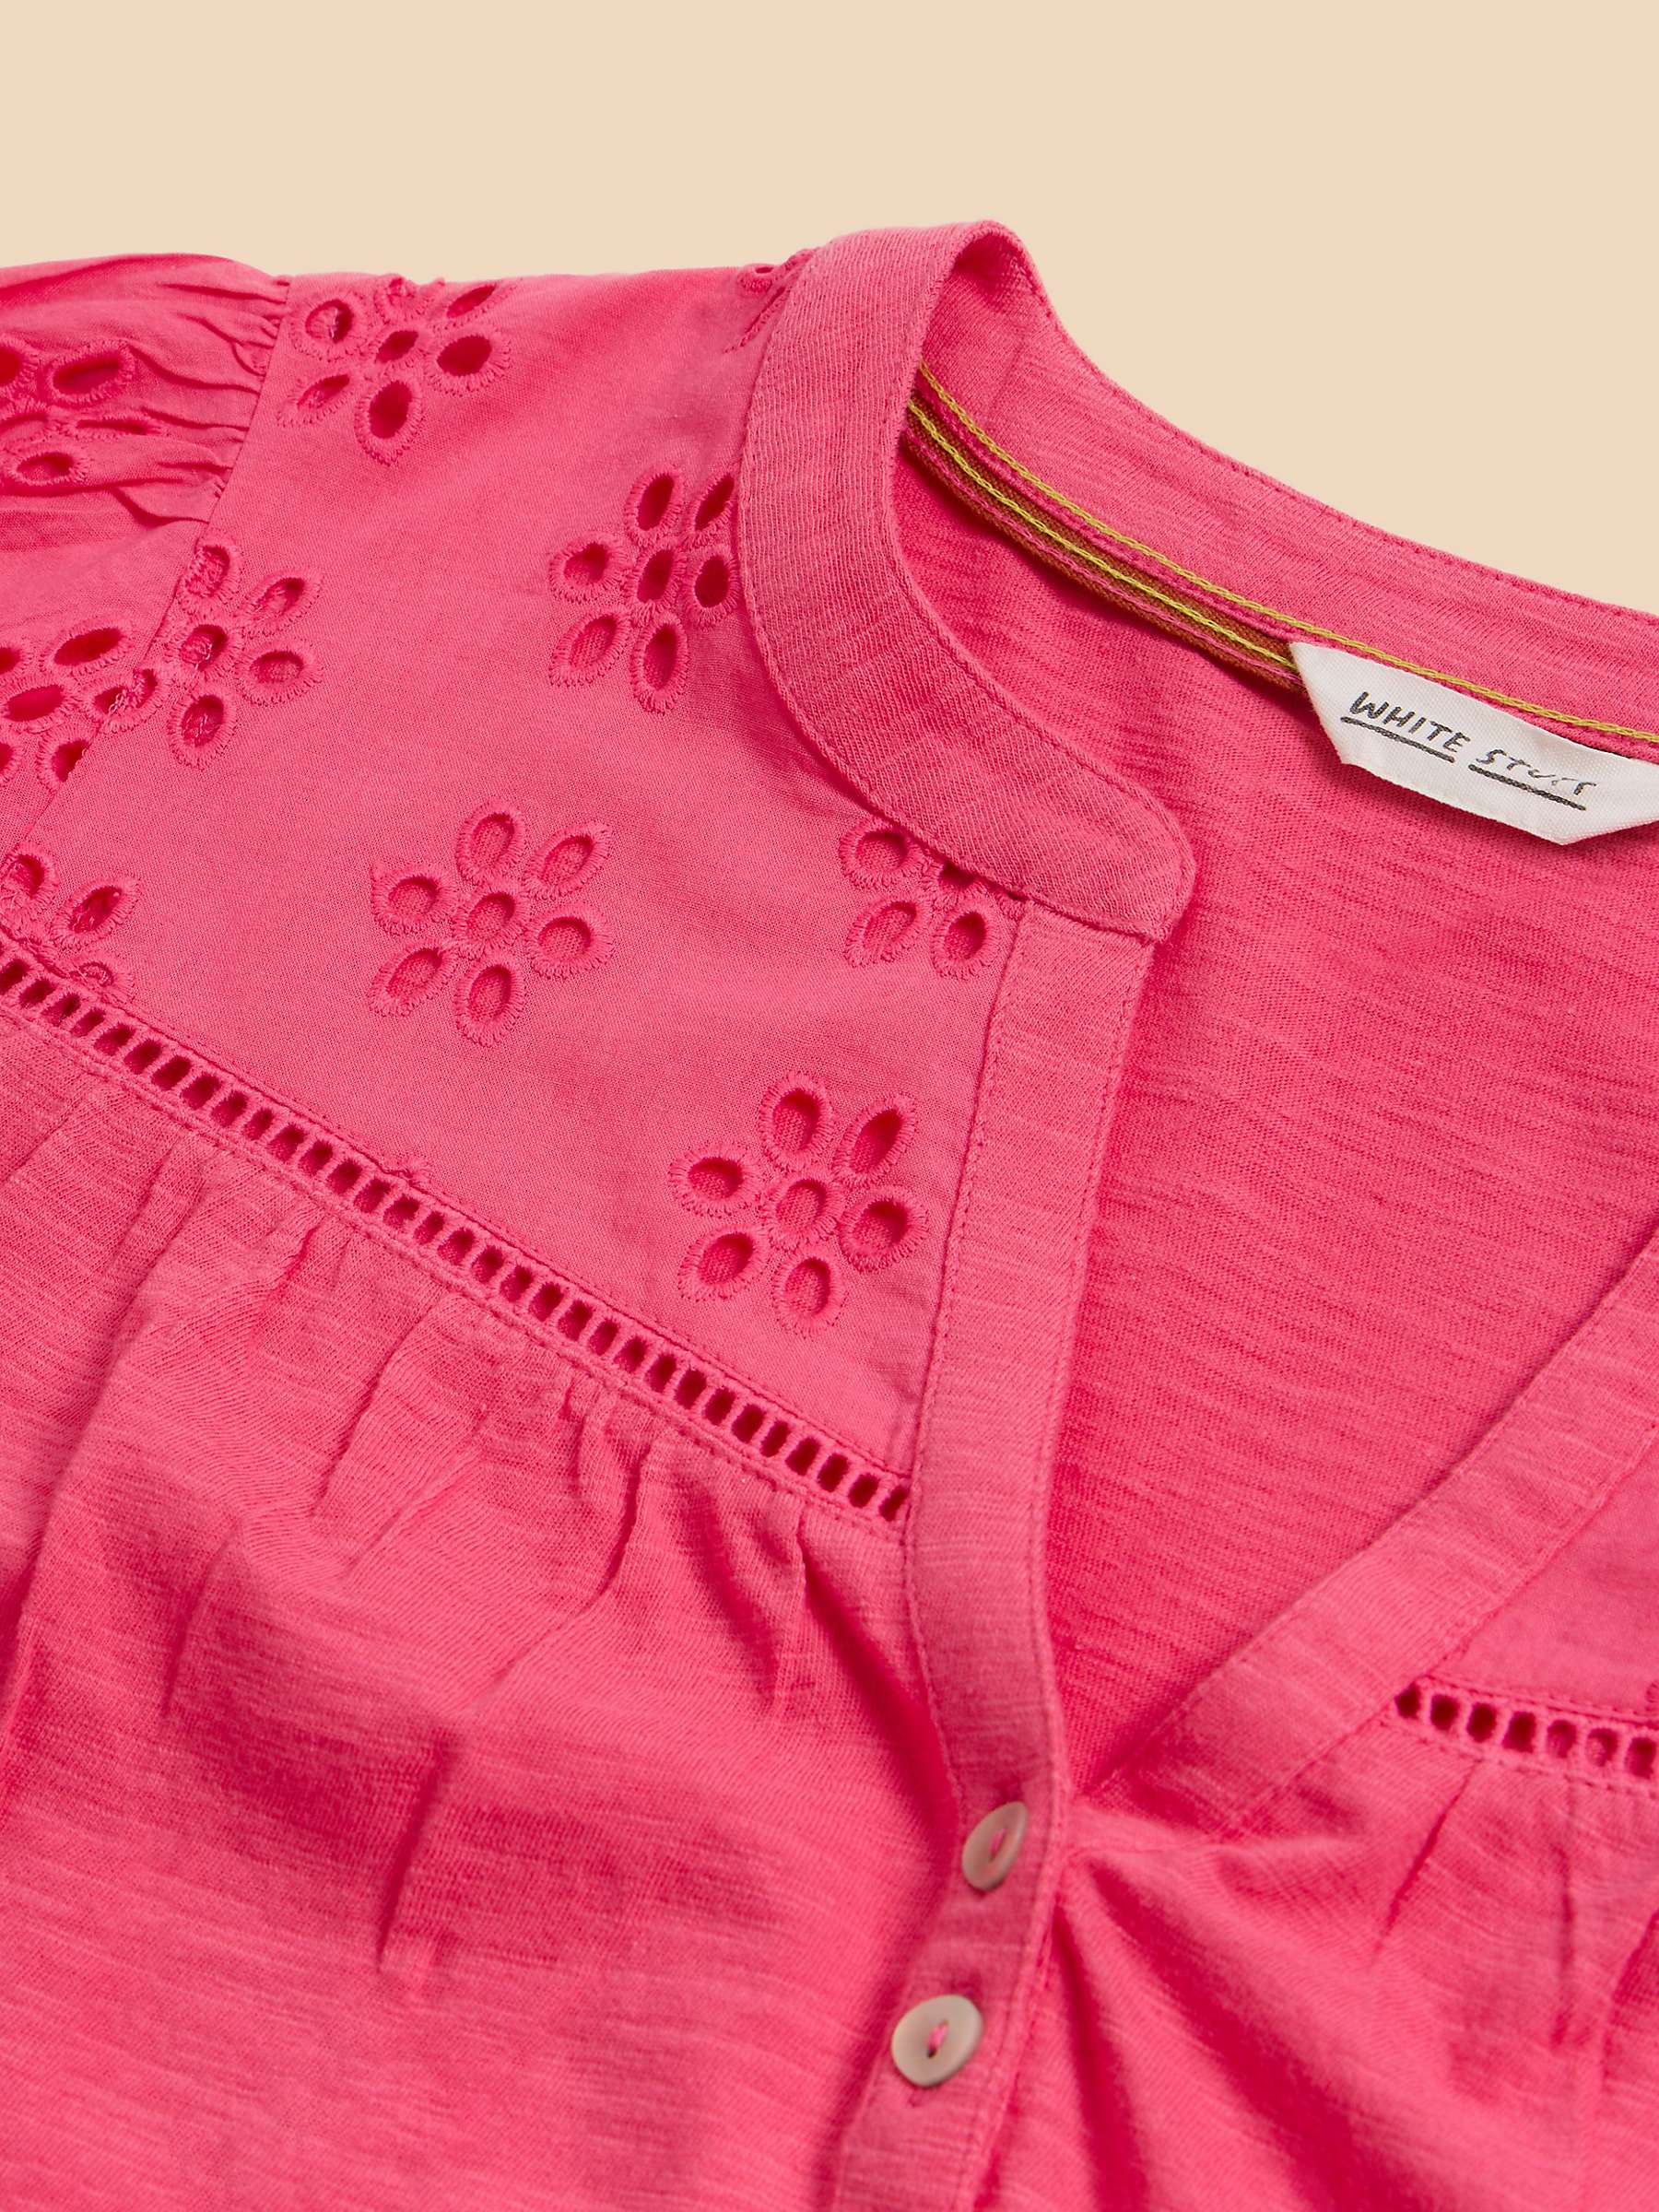 Buy White Stuff Bella Cotton Broderie Top, Mid Pink Online at johnlewis.com